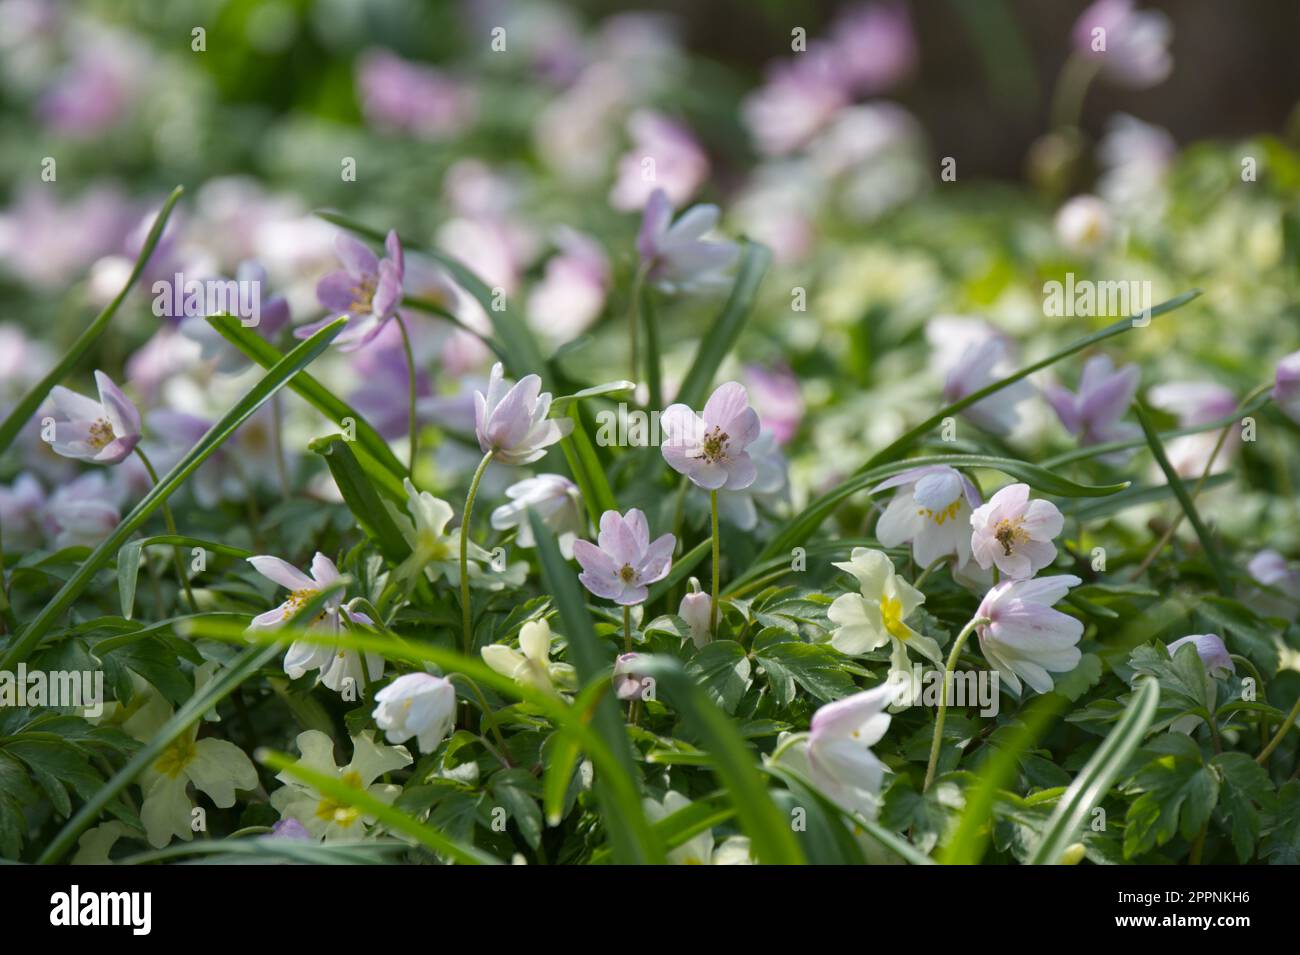 Pale yellow primroses Primula vulgaris and pink spring flowers of wood anemone nemorosa E.A. Bowles in UK garden April Stock Photo